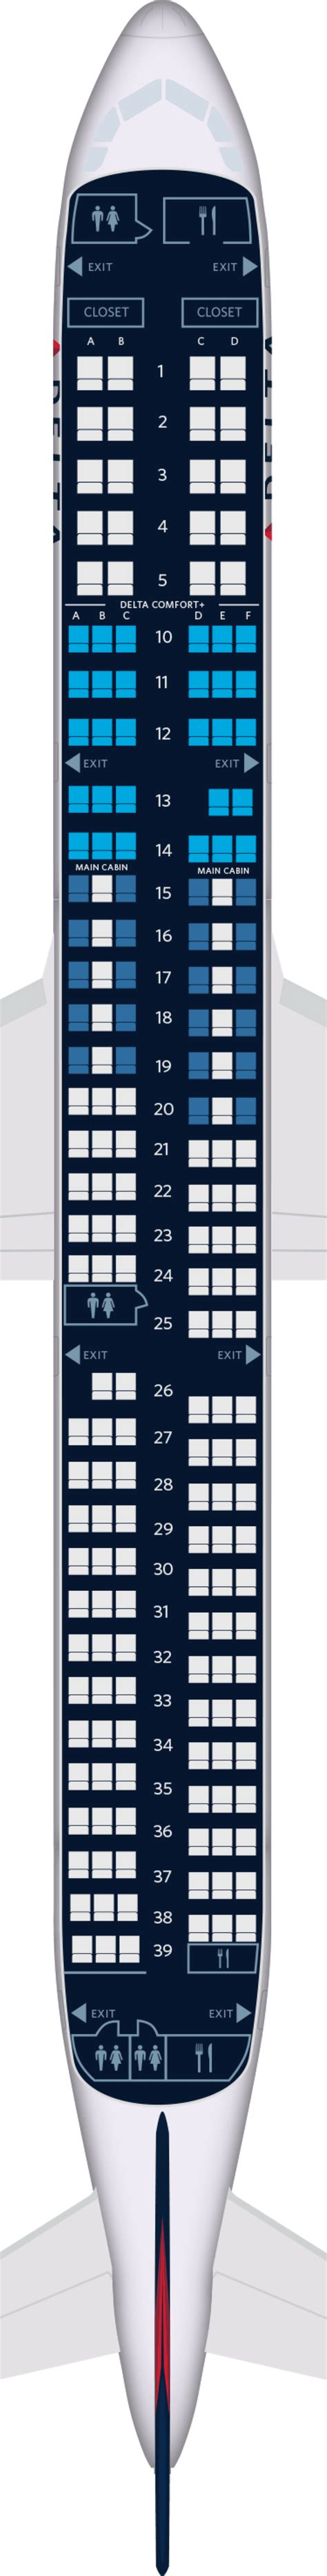 Seat Chart For Airbus A321